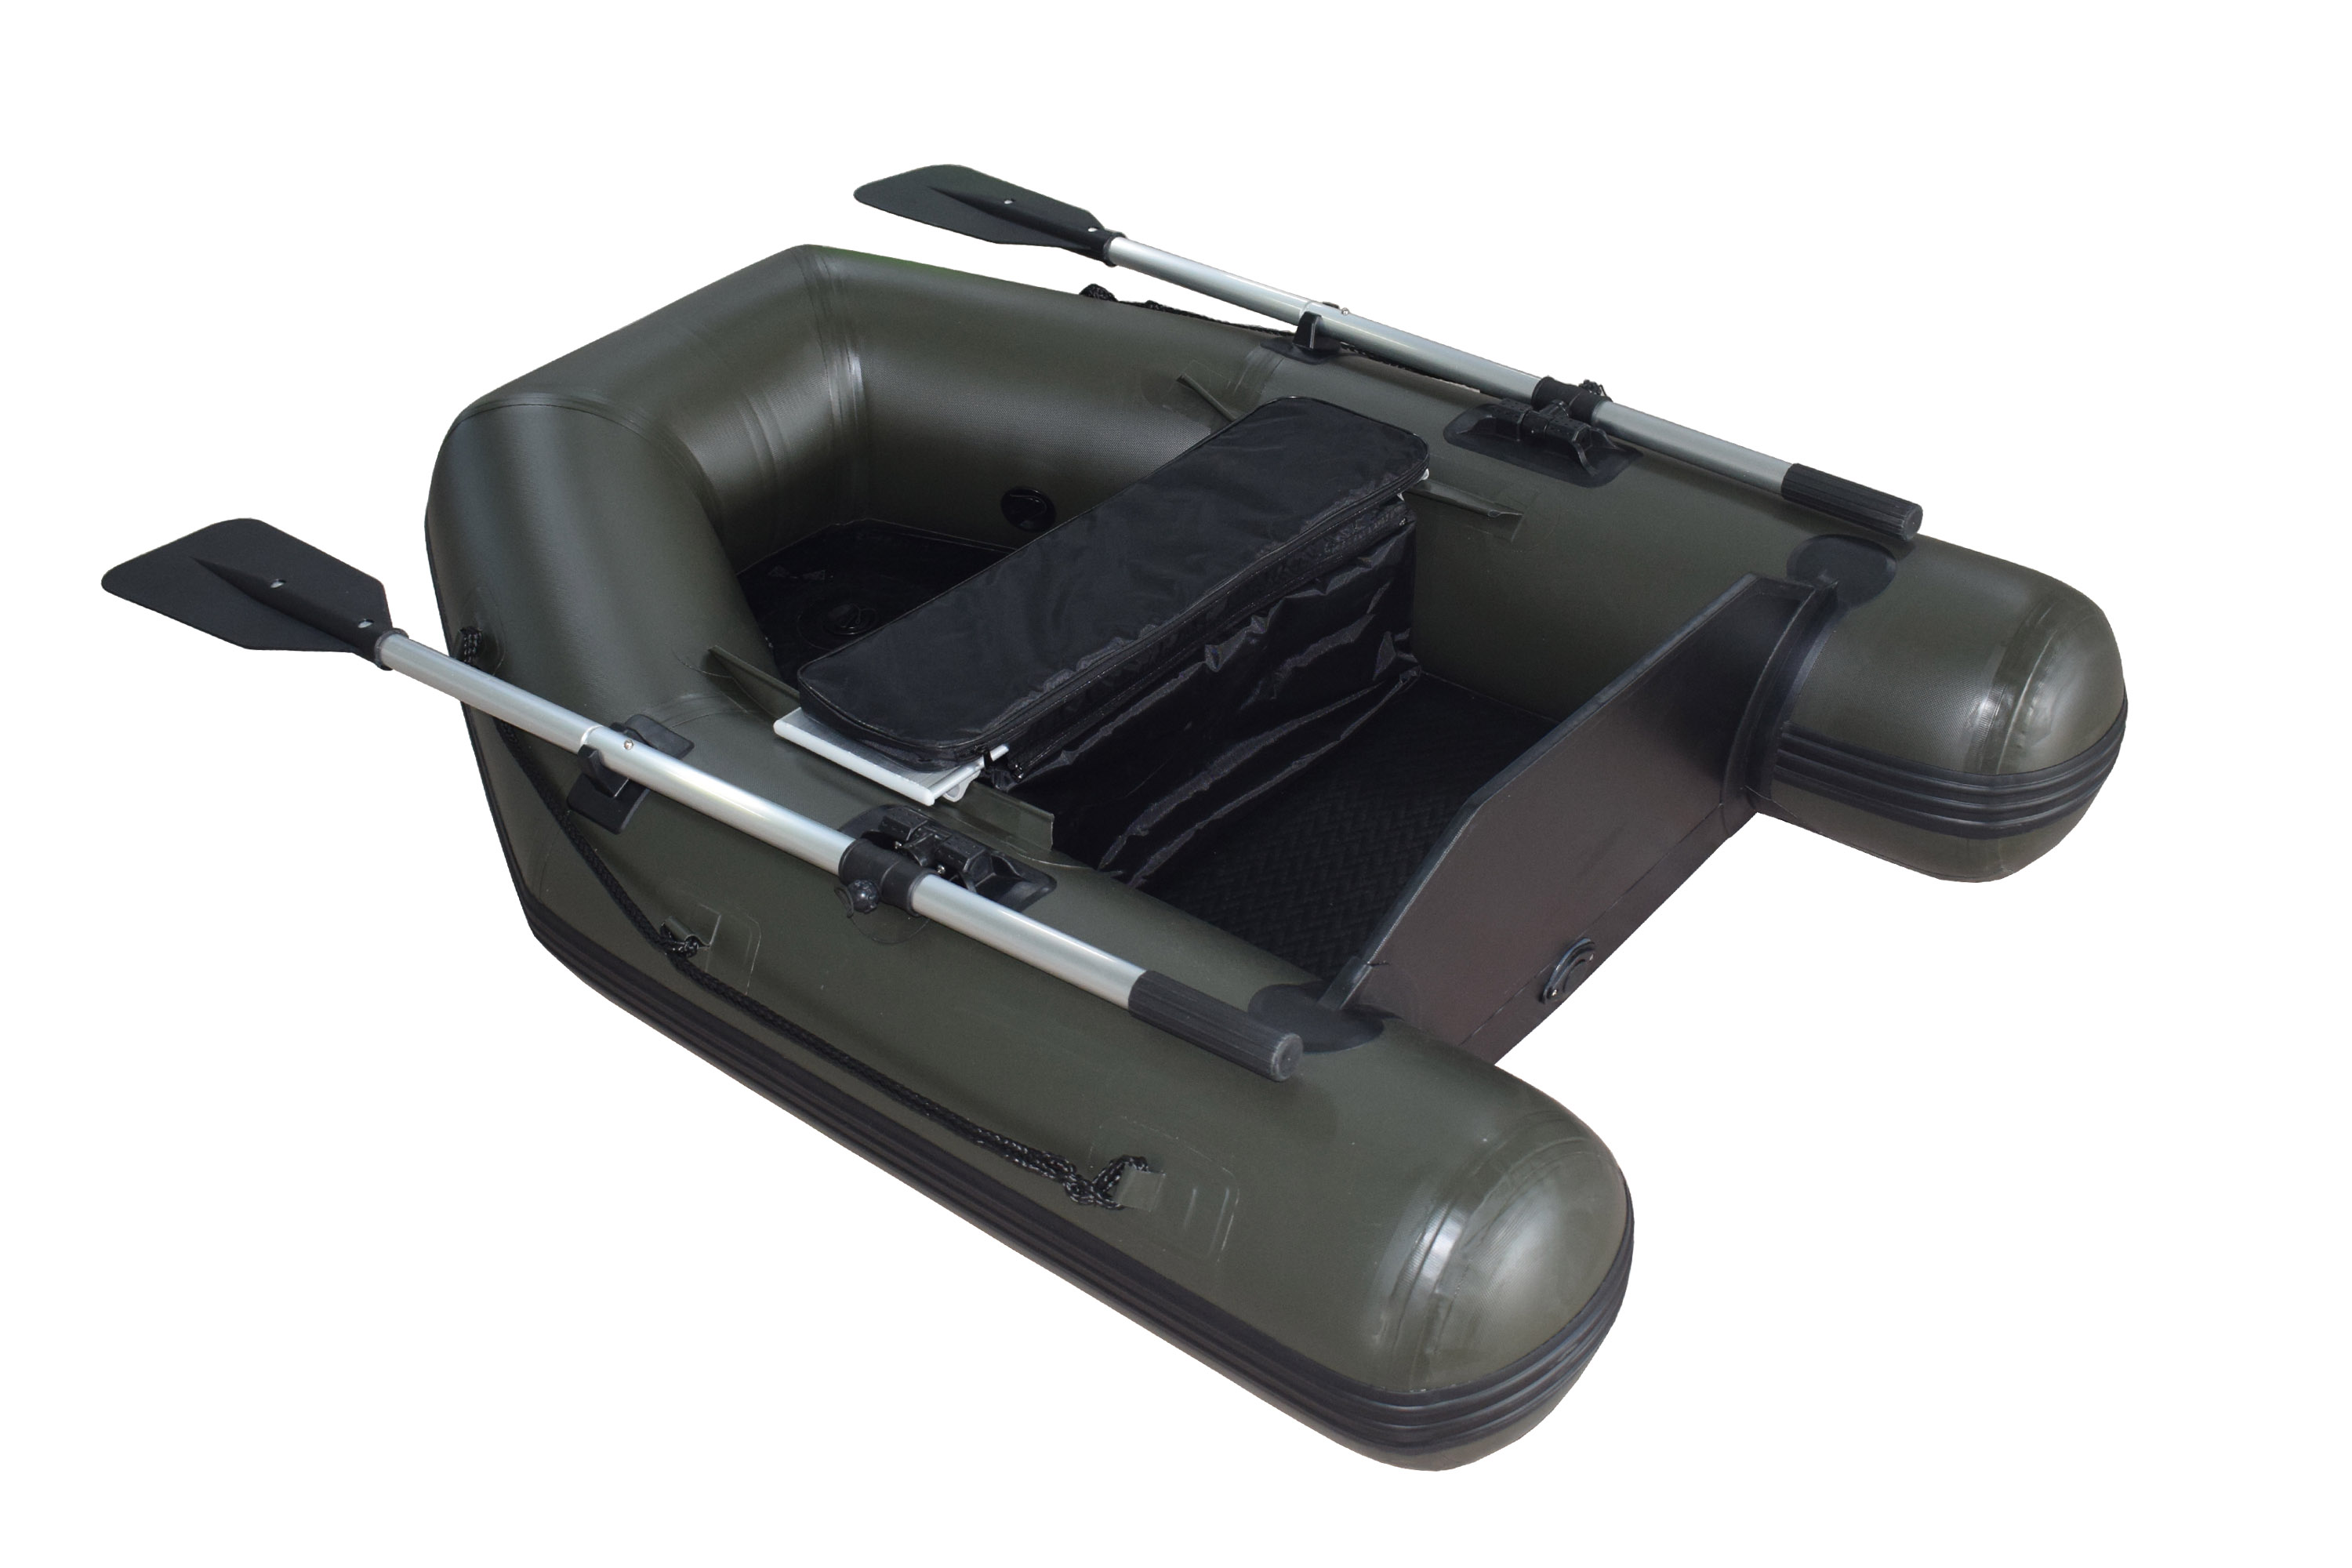 The Ultimate Fishing Companion: Kinglight Collapsible Dinghy